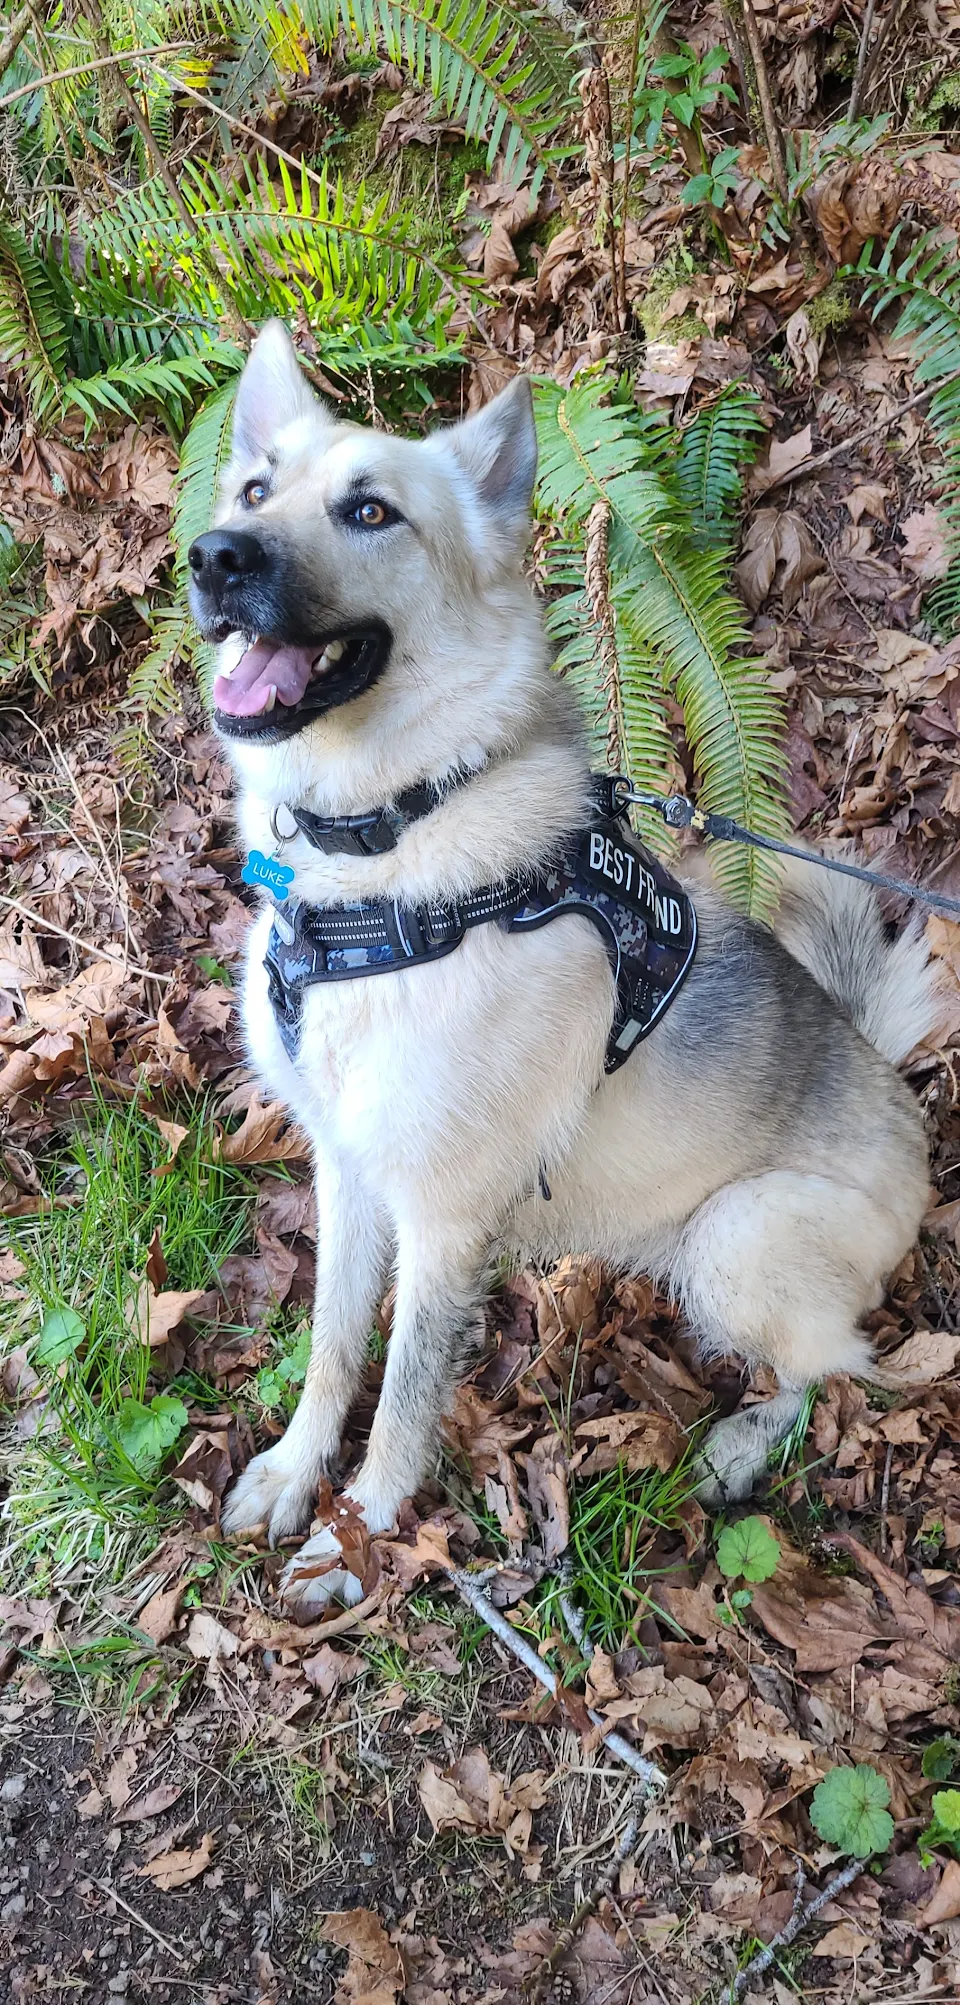 My shepsky loves going on hikes!